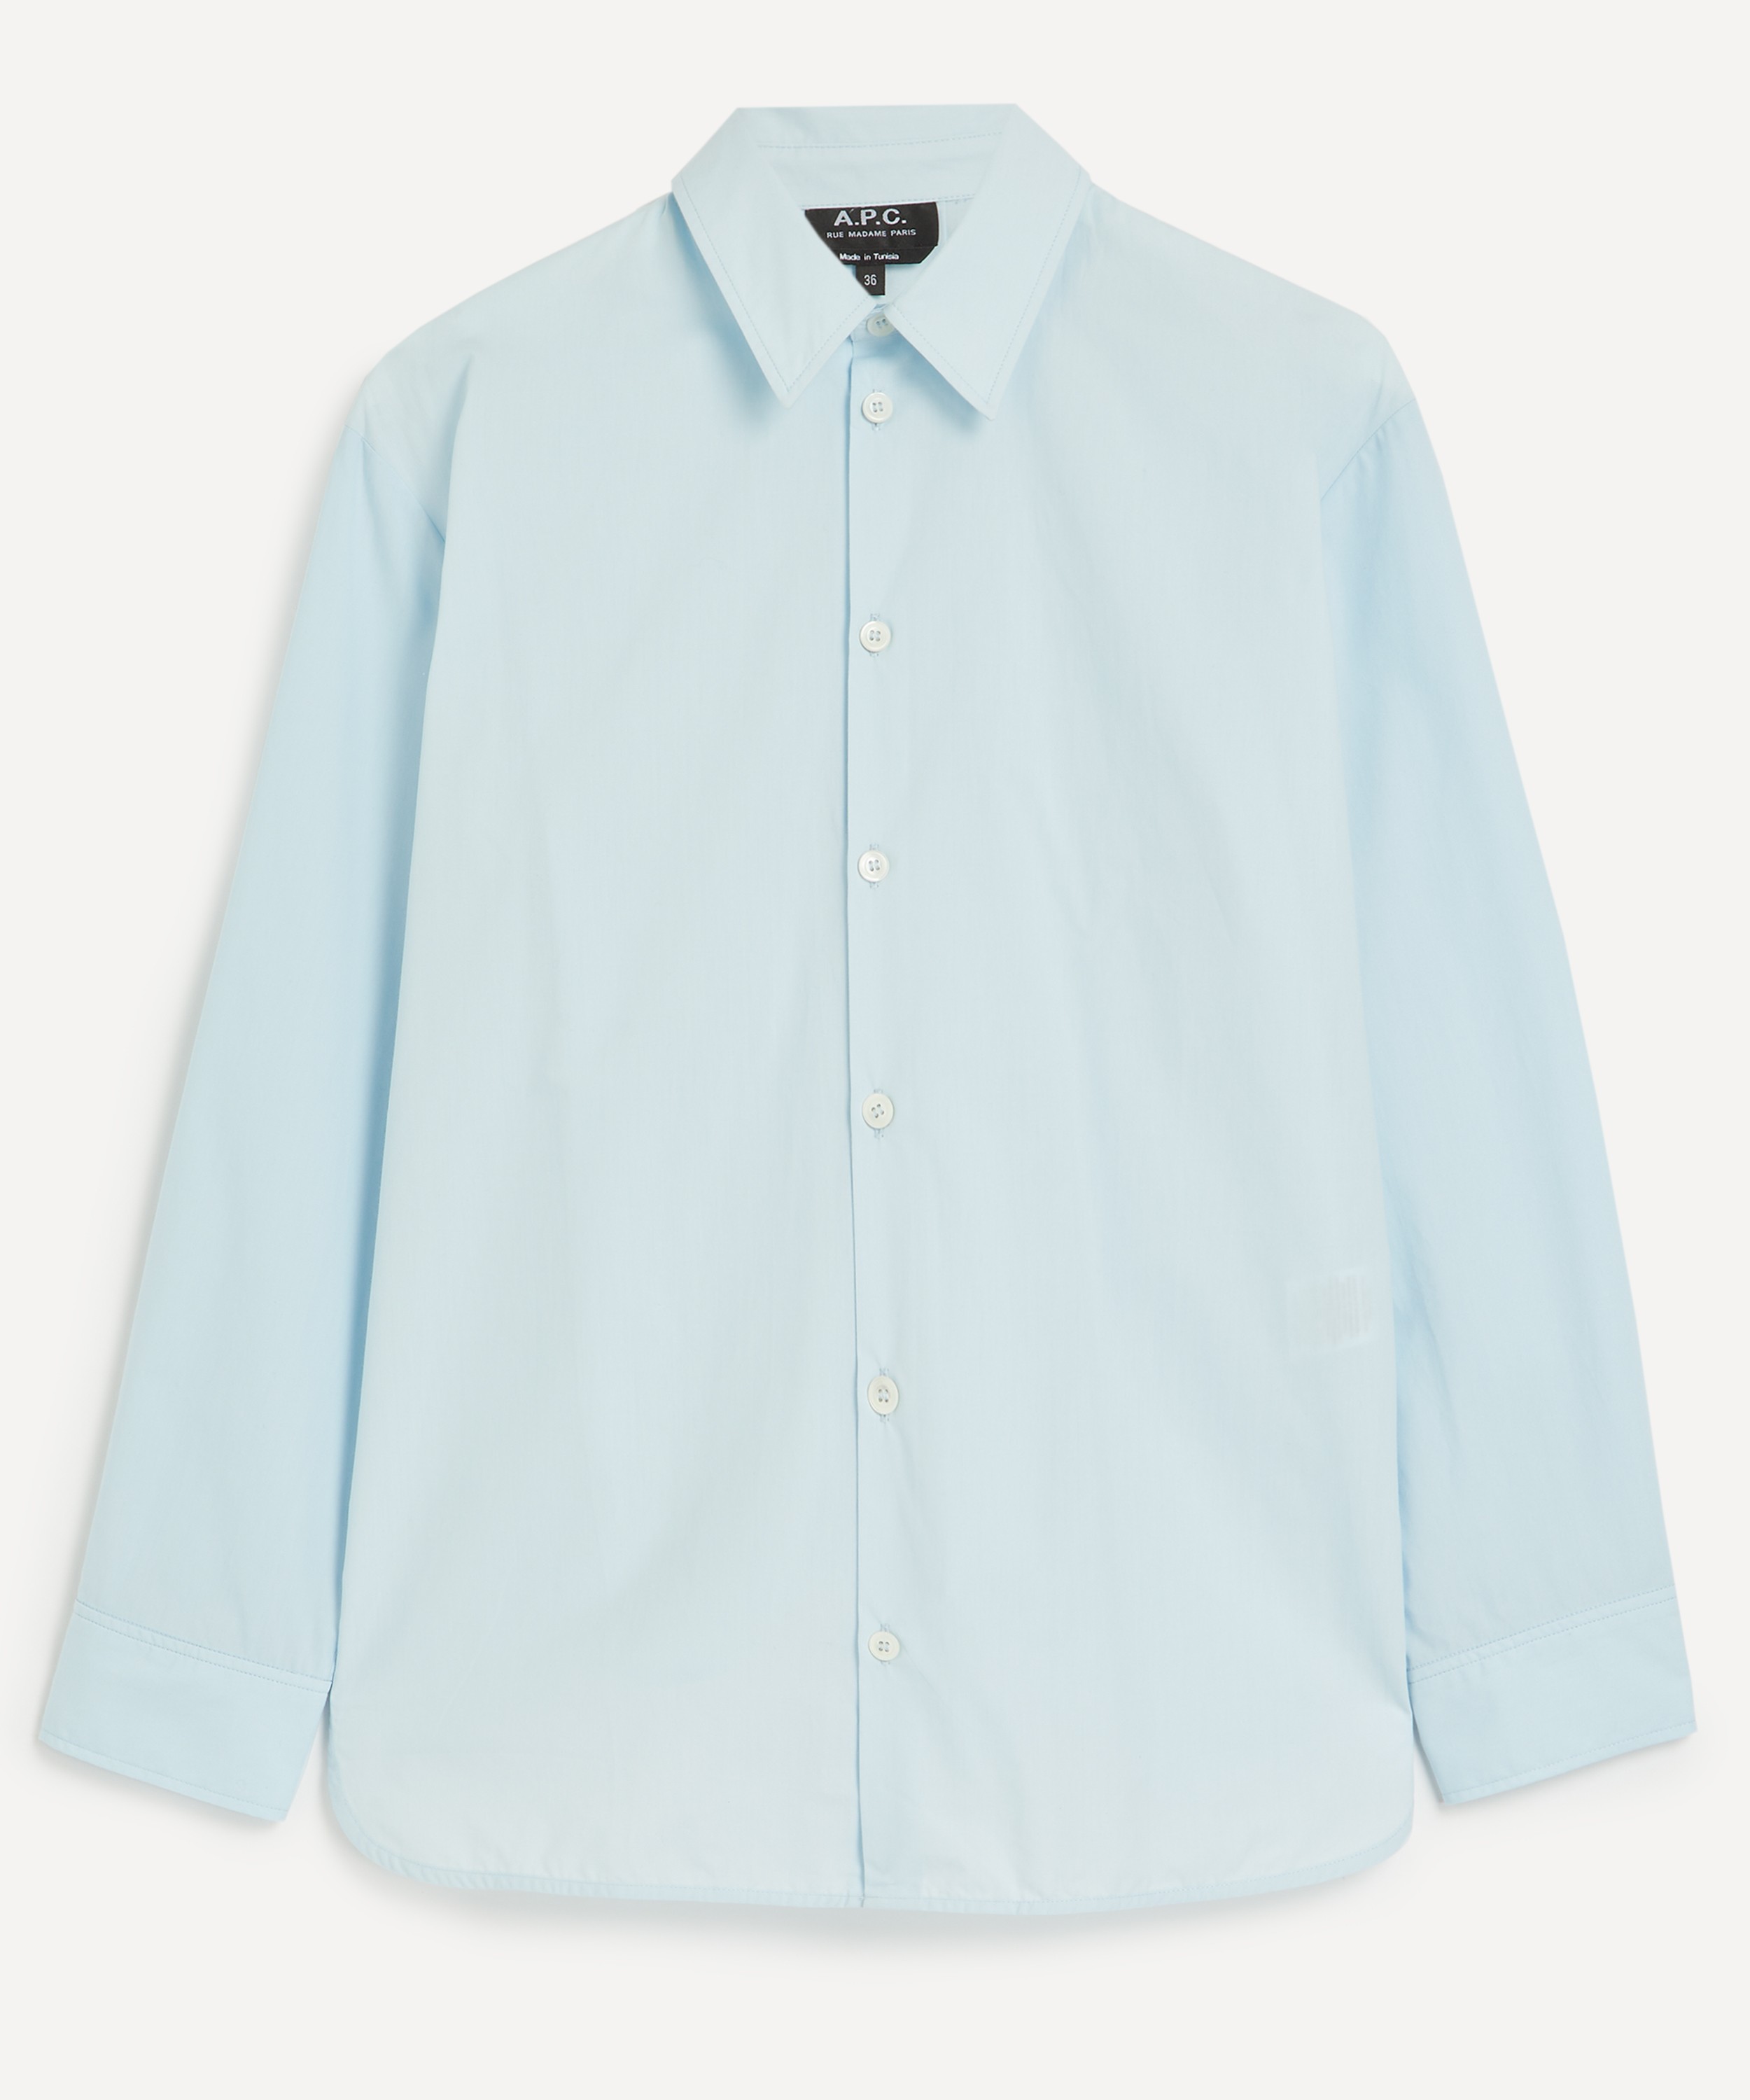 A.P.C. - Rosie Cotton Shirt image number 0